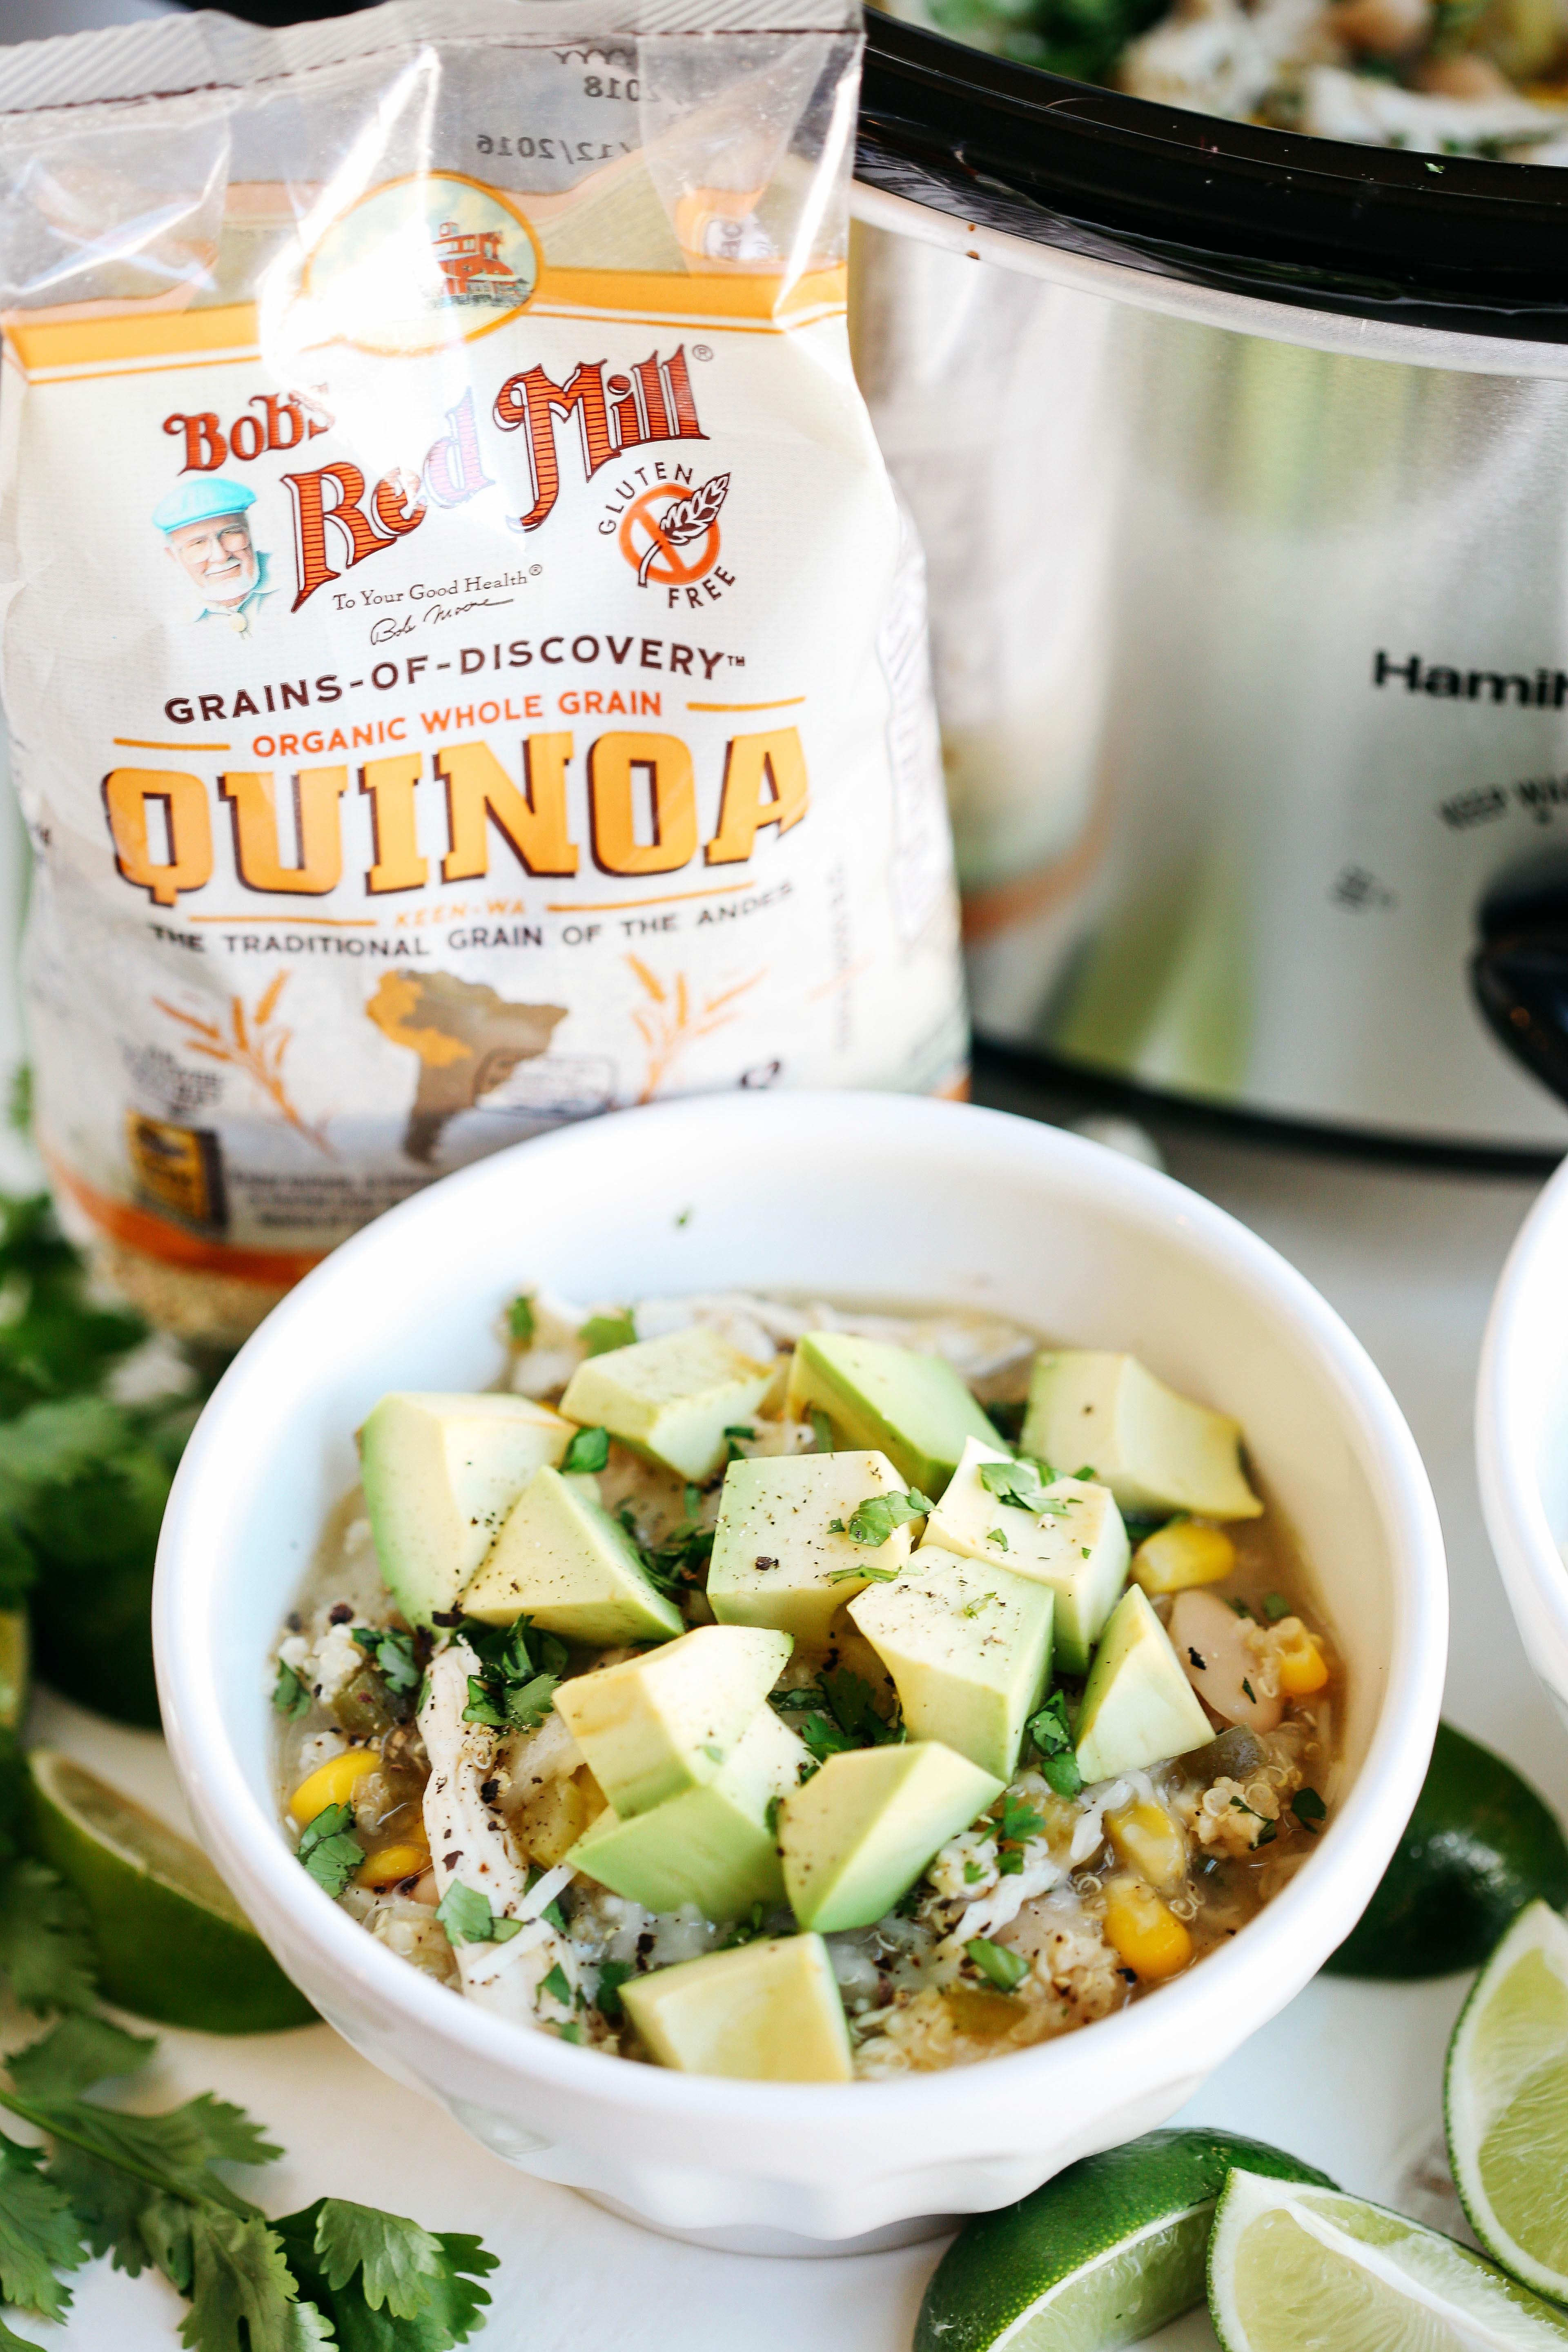 This Slow Cooker White Chicken and Quinoa Chili is the perfect blend of hearty and healthy that will keep you warm and cozy all winter long!